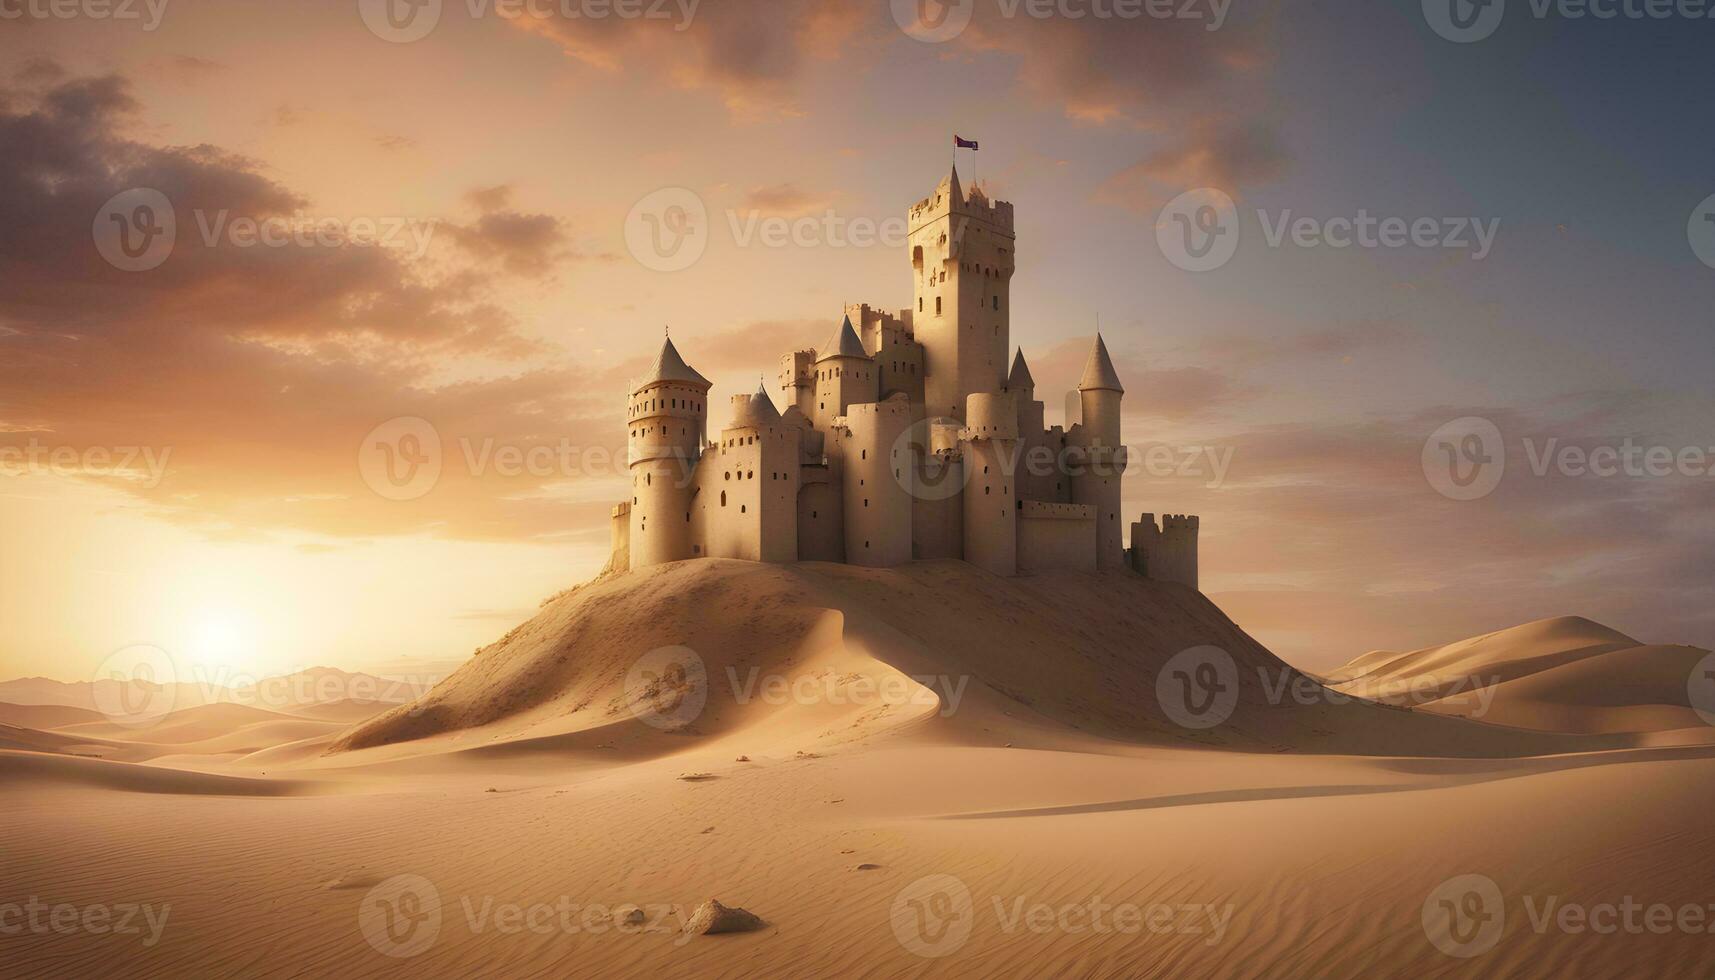 AI generated a castle in the desert with a sunset photo